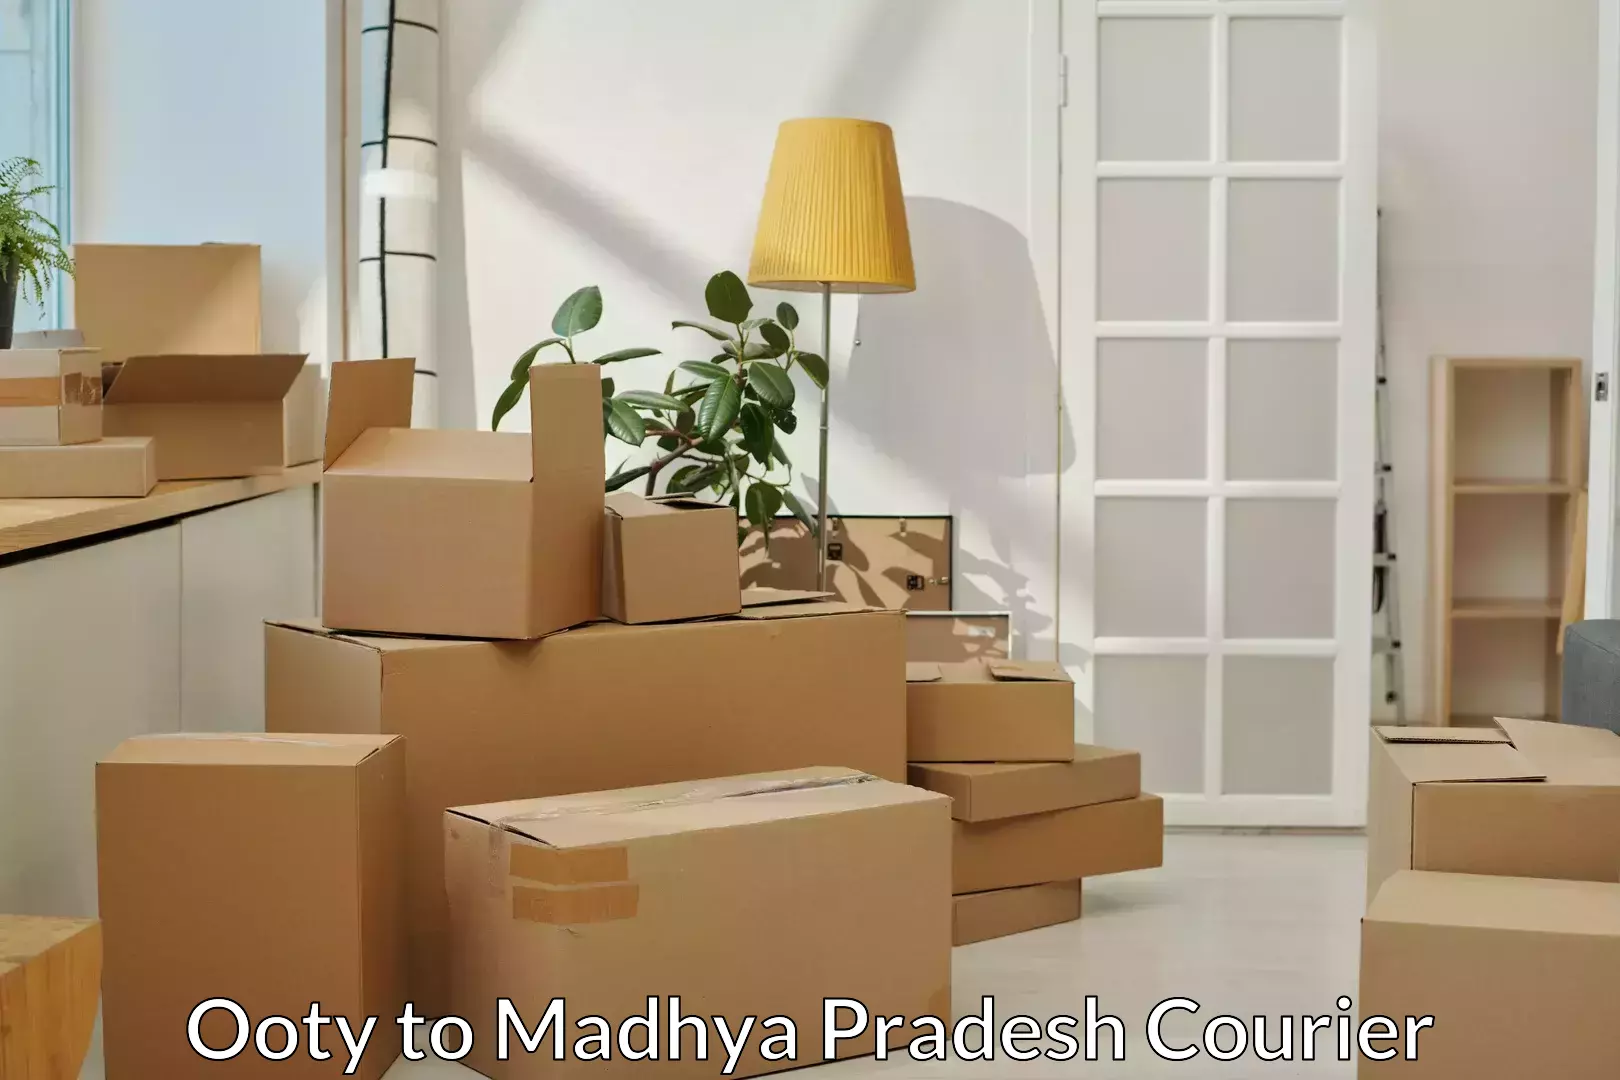 Trusted moving company Ooty to Anuppur